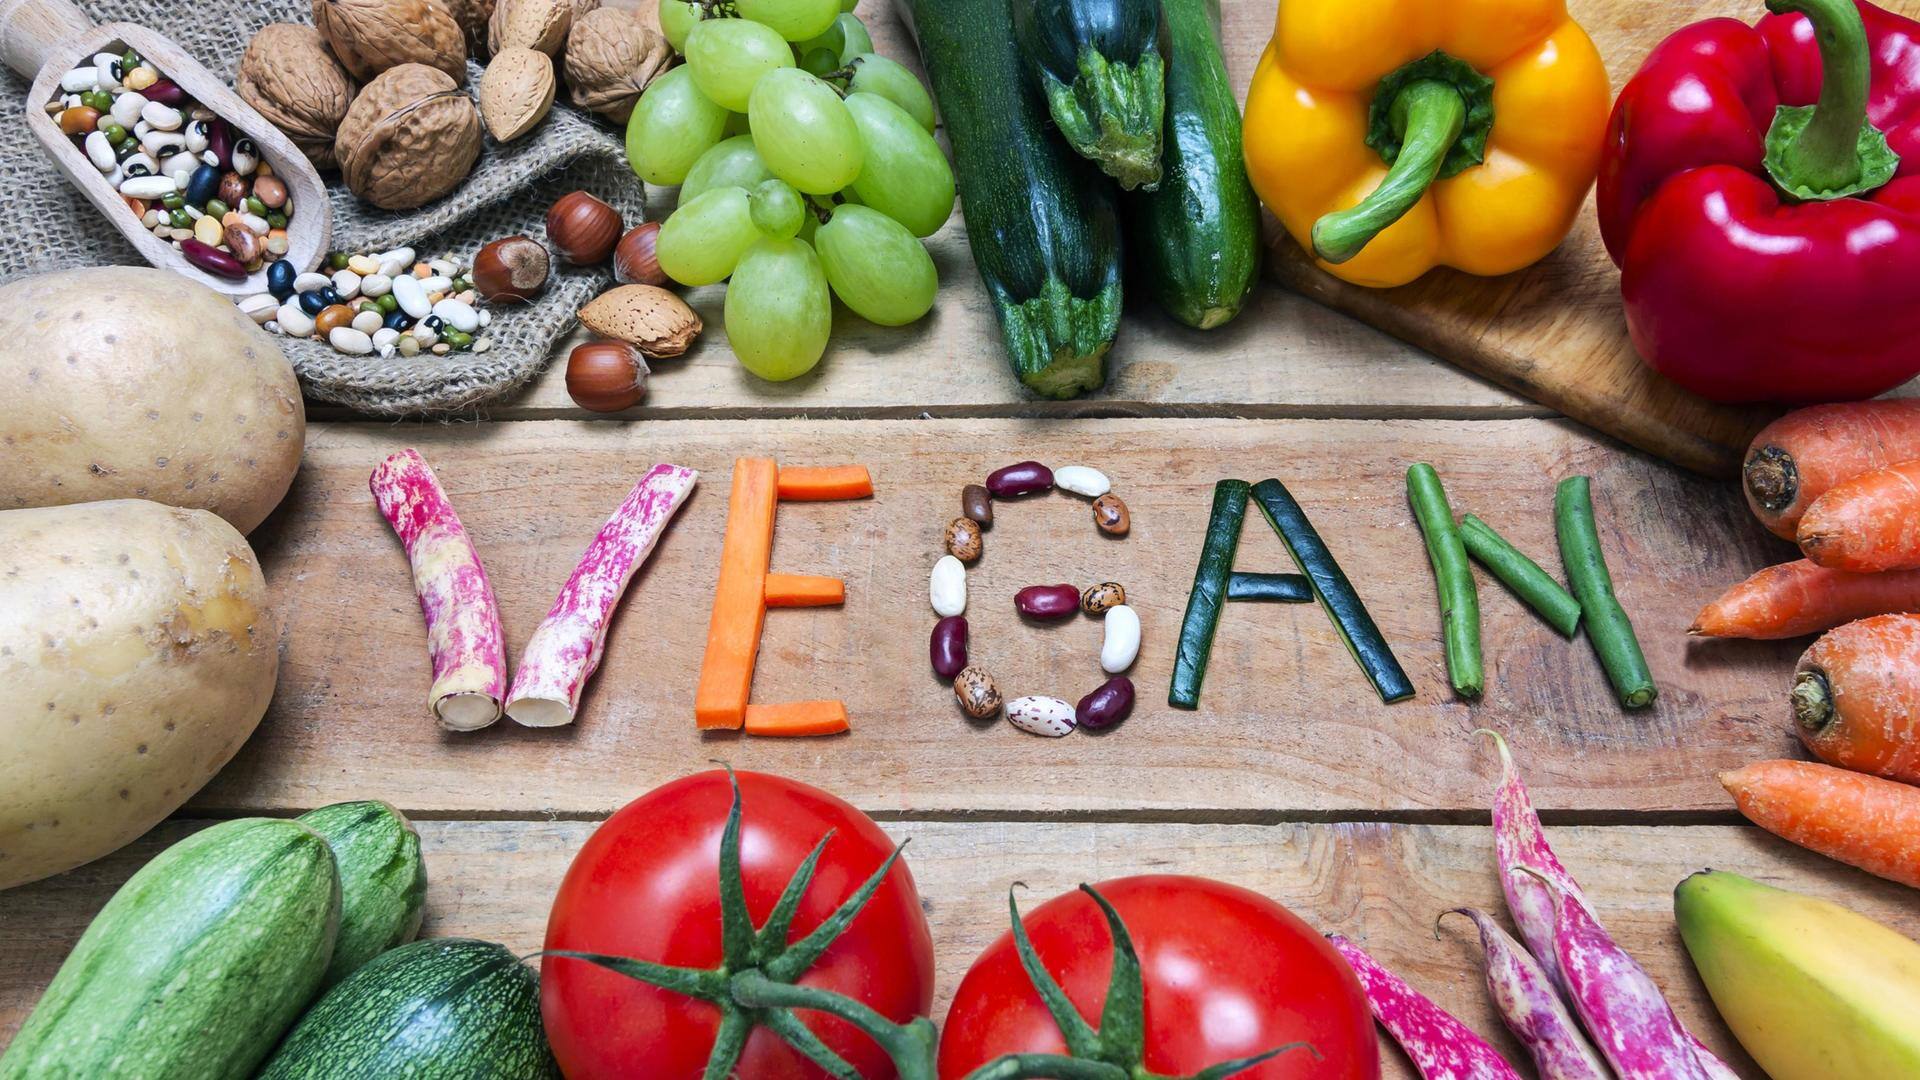 Veganism is good, but has many myths. Let's bust them